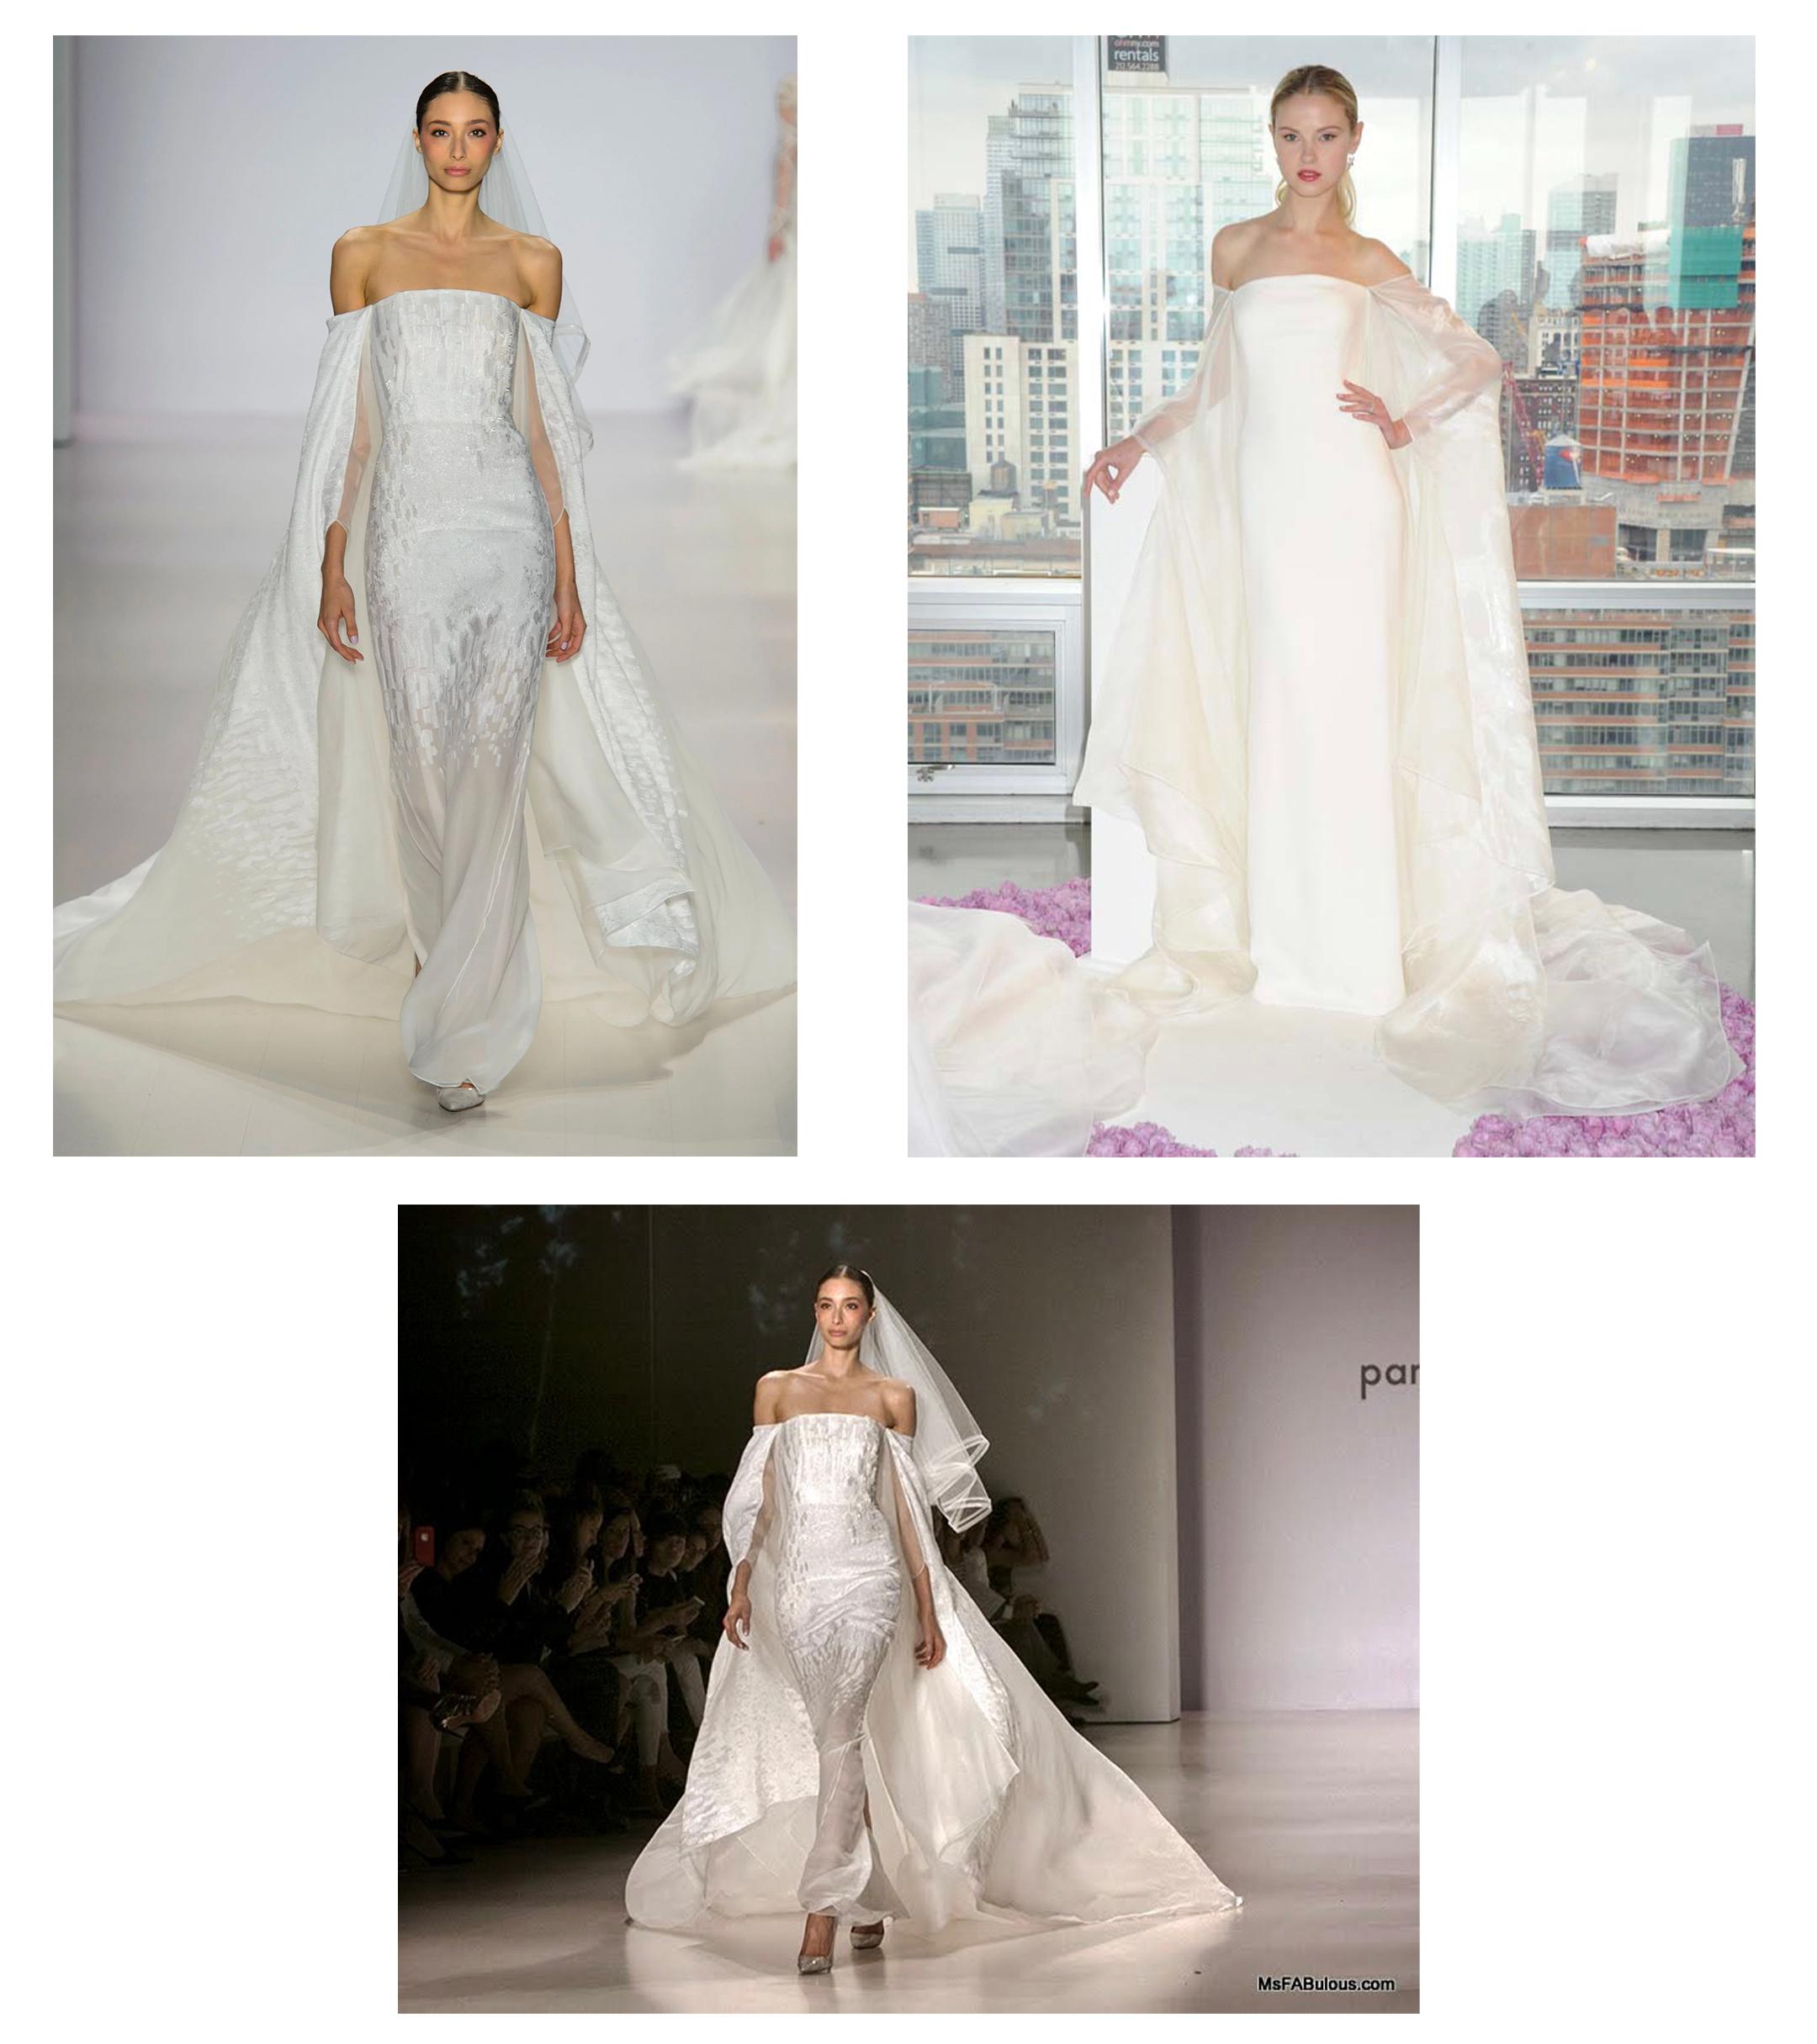 The best wedding dresses from New York Bridal week | The Independent | The  Independent